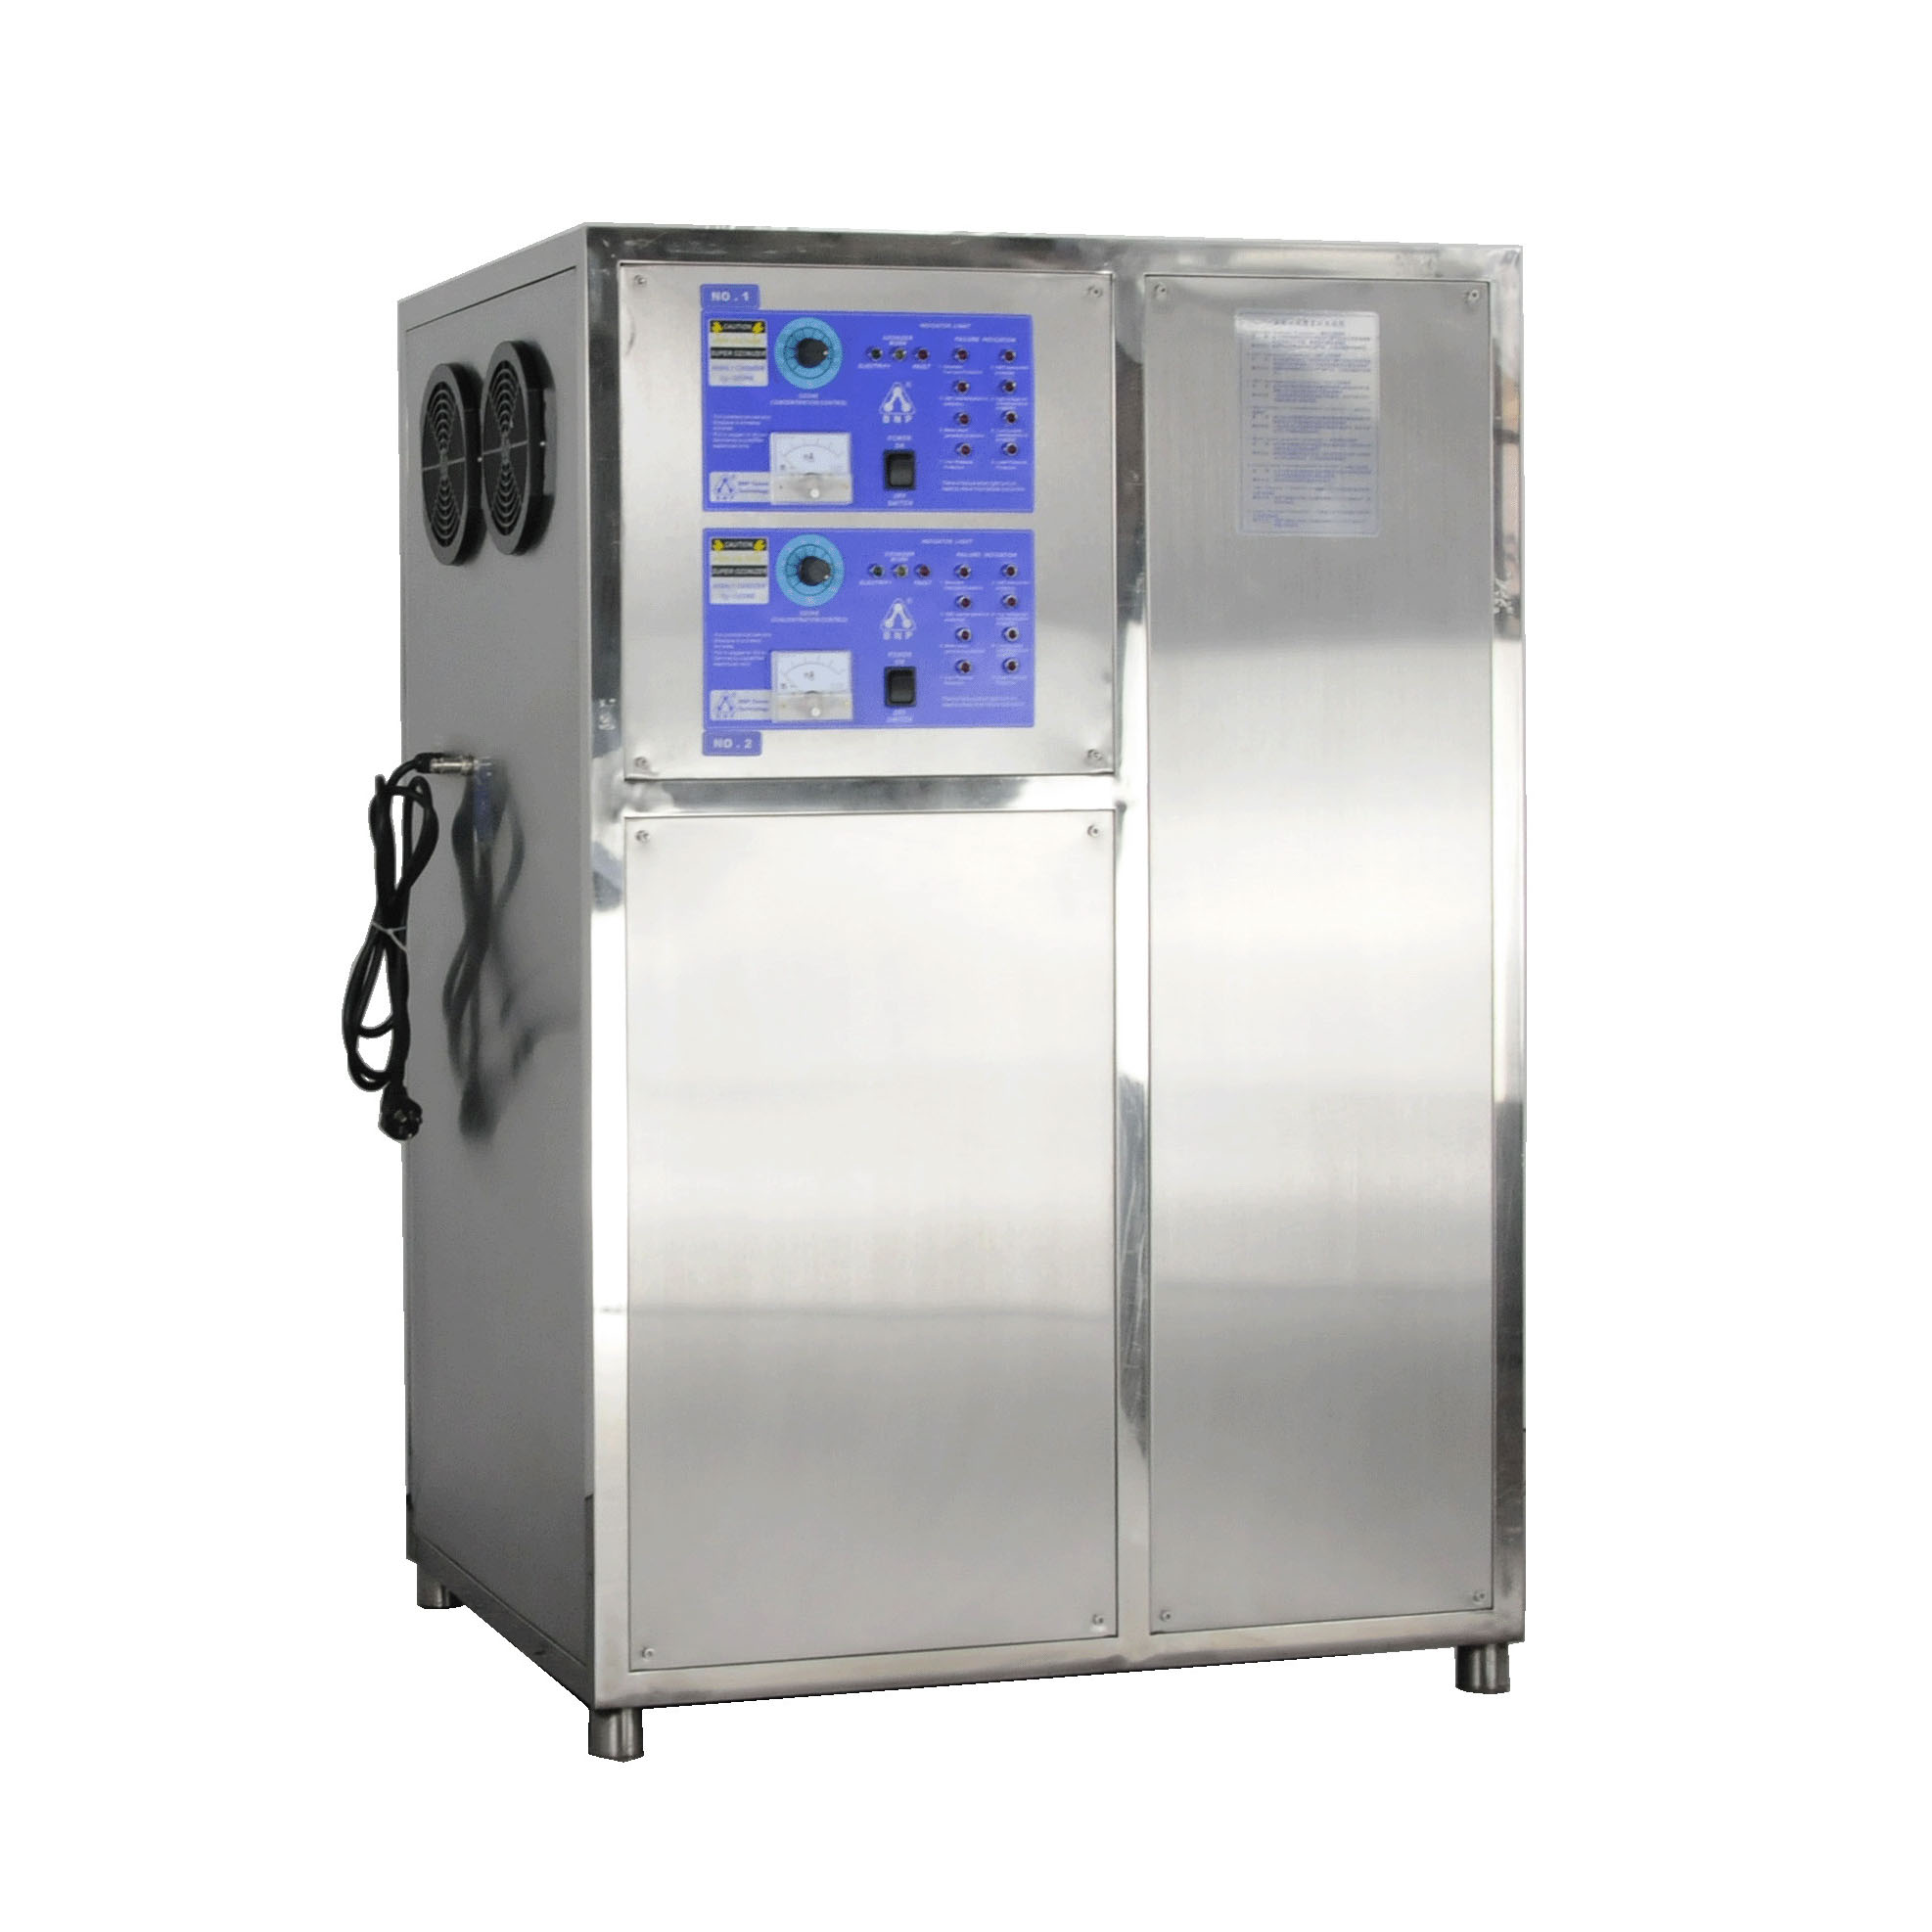 Hot sale Factory Oxygen Source Ozonator - Discountable Price China BNP SOZ-YW-150G Ozone Generator O3 Machine Water Purifier Swimming Pool Ozonizer For Water Treatment – BNP